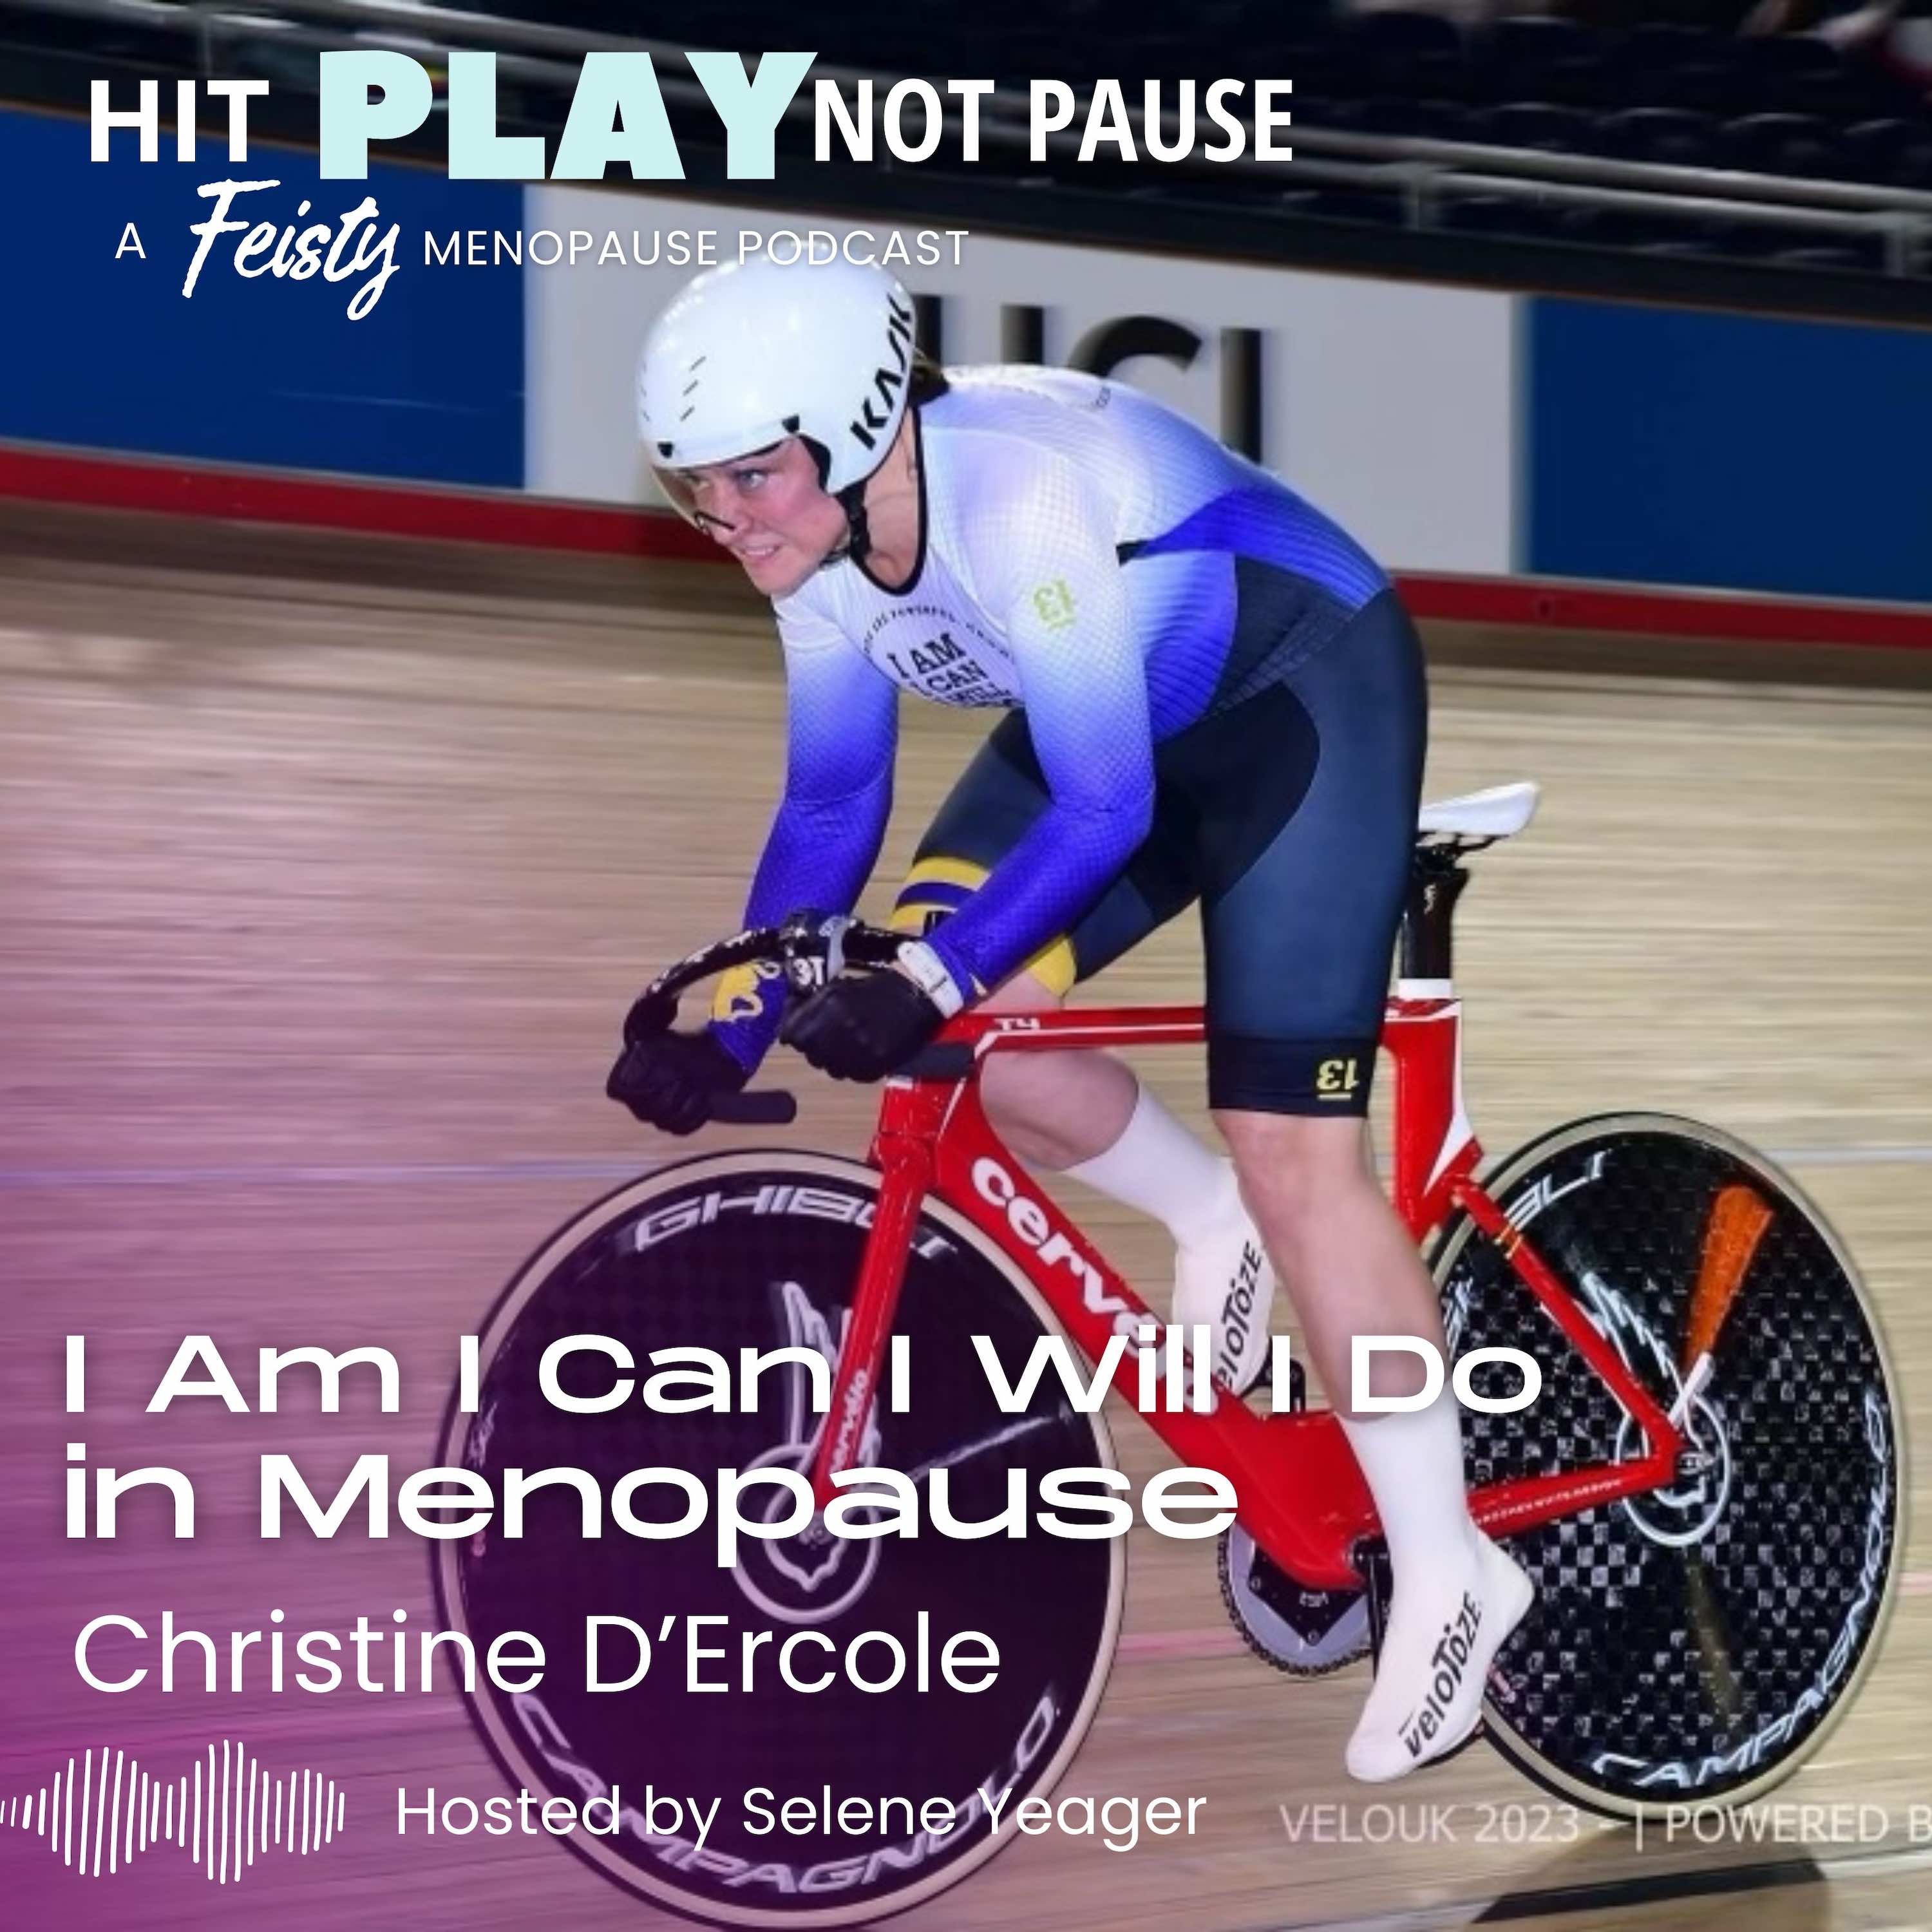 I Am I Can I Will I Do in Menopause with Christine D’Ercole (Episode 159)